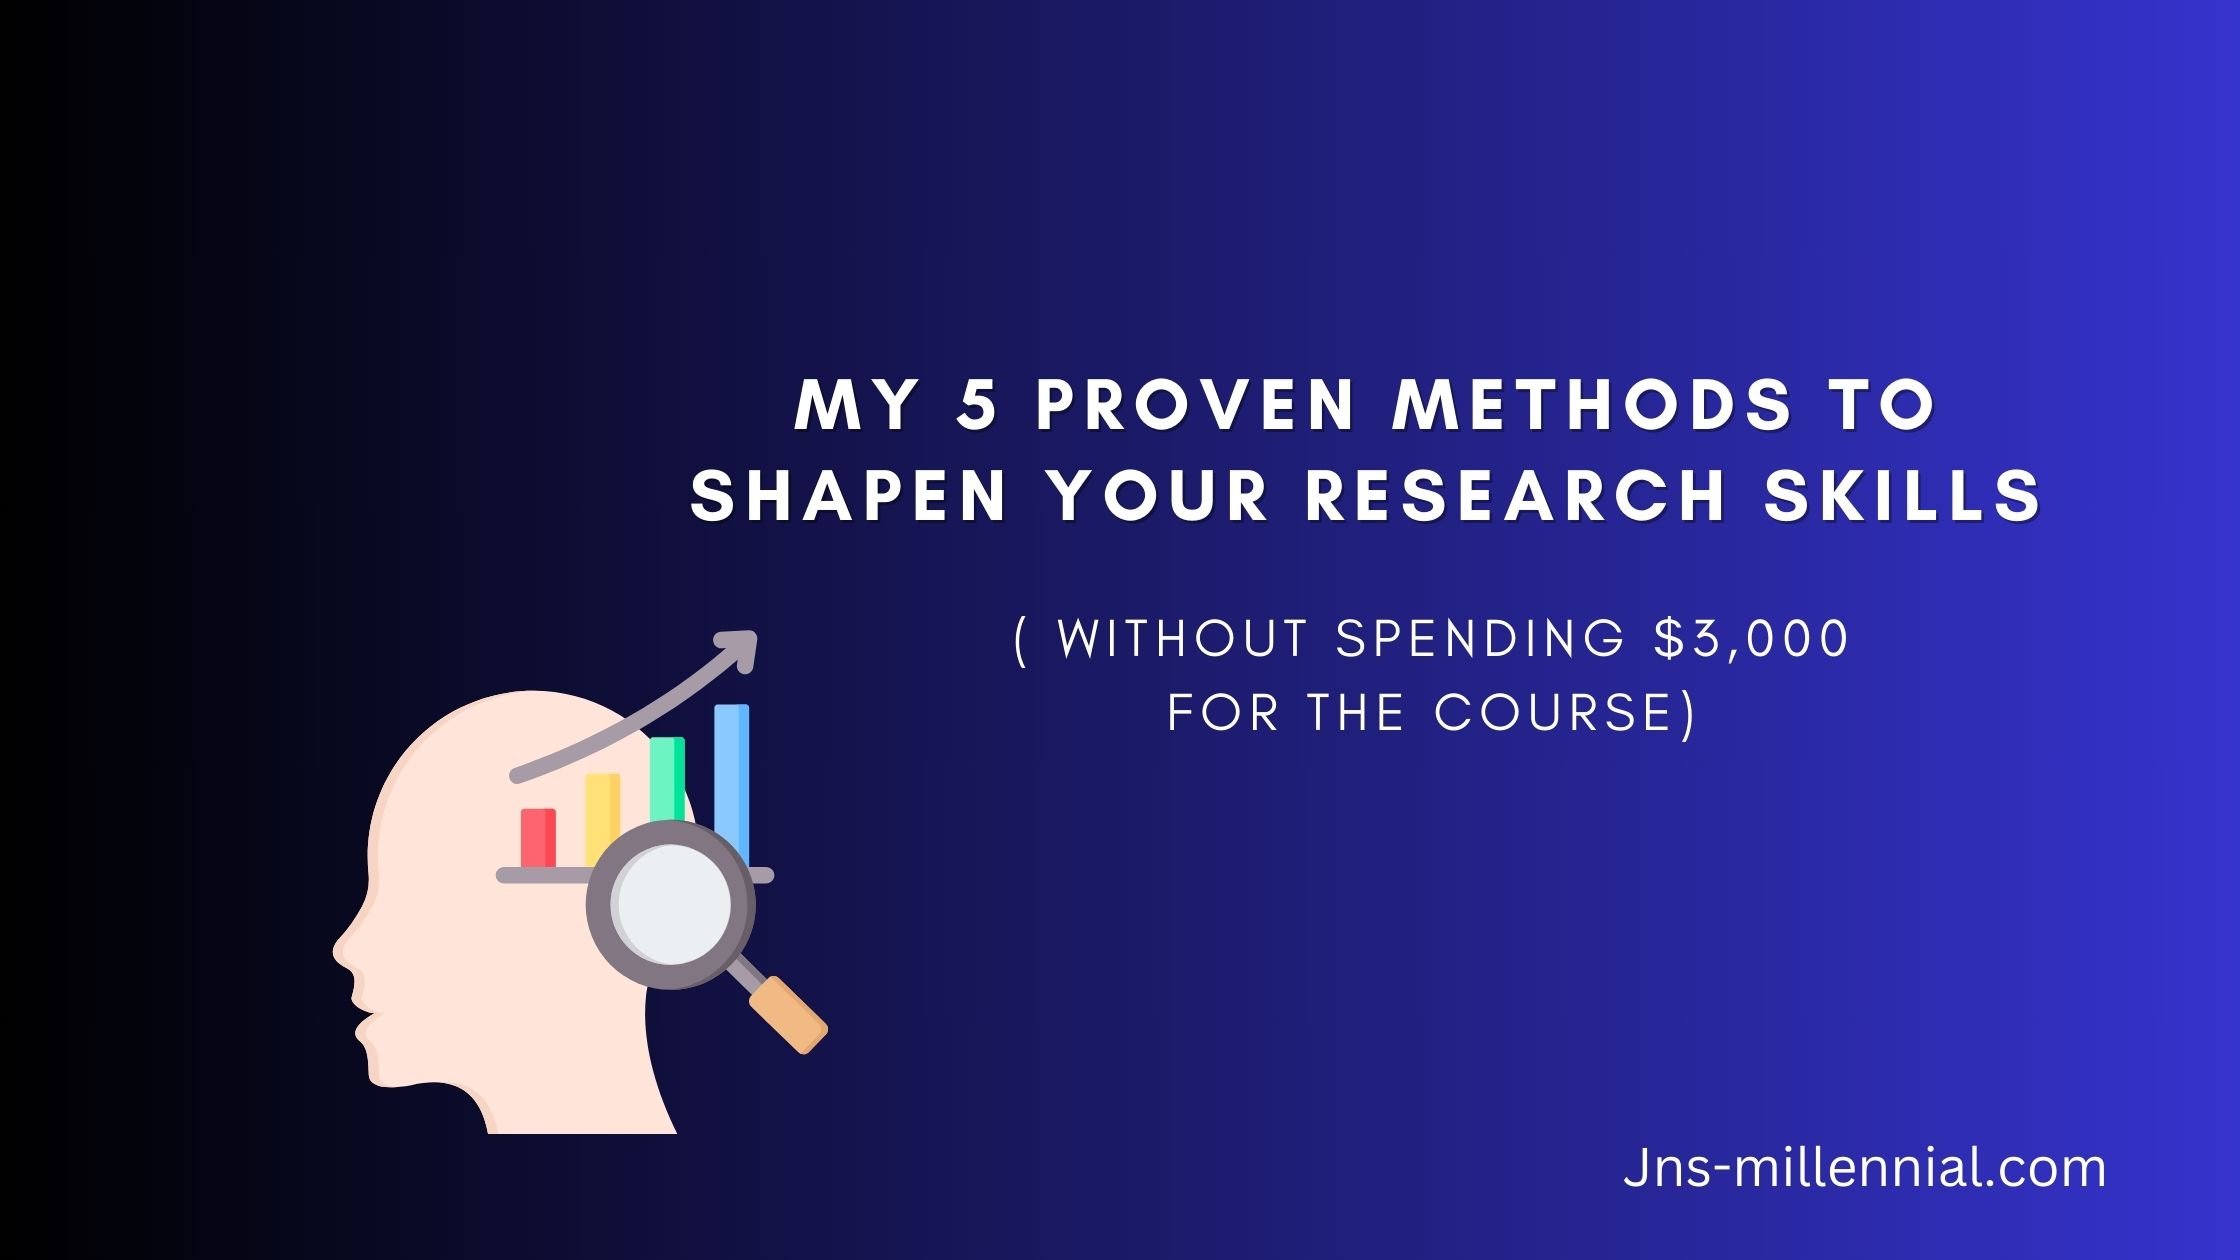 My 5 Proven Methods to Shapen Your Research Skills